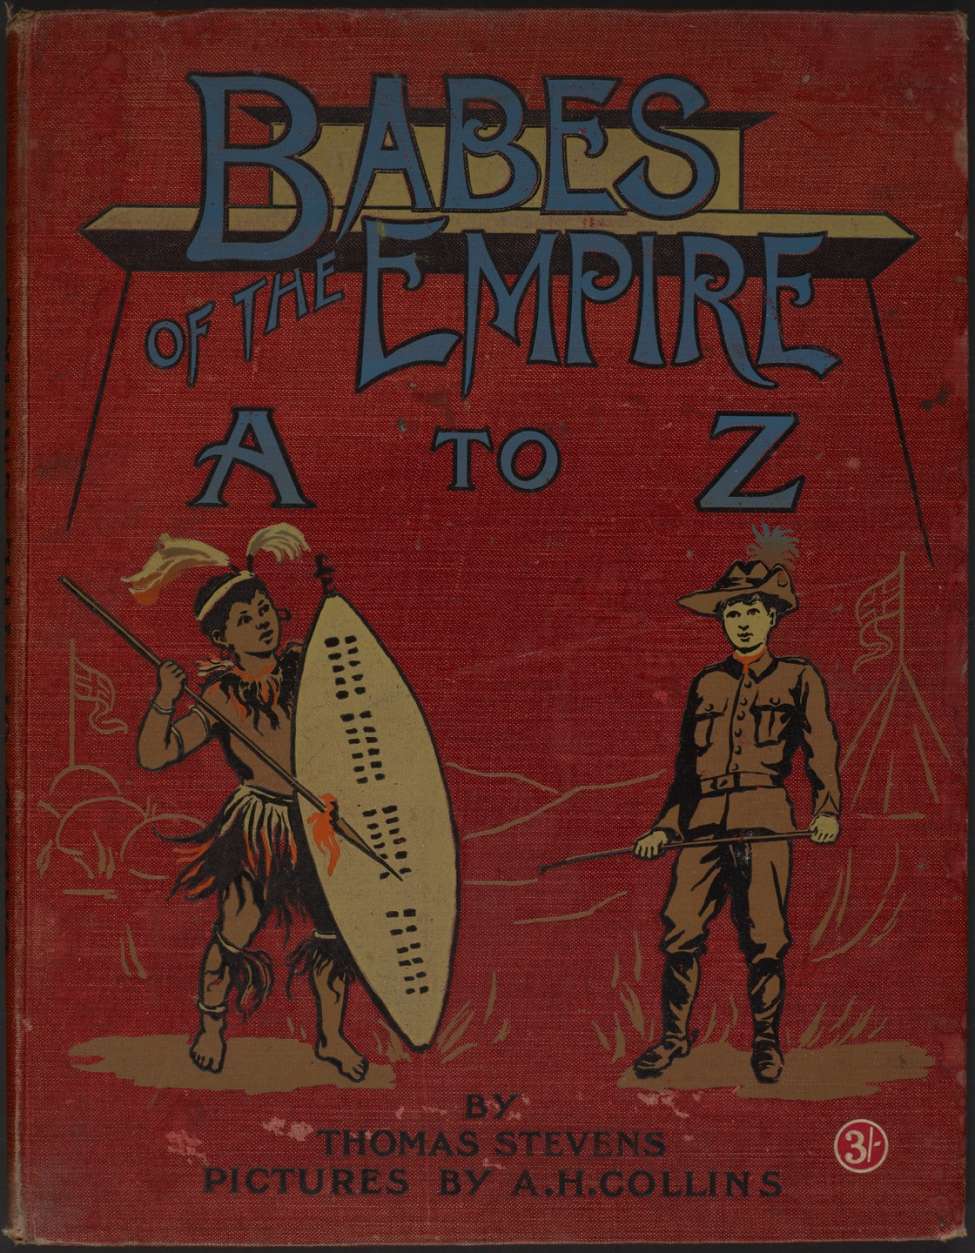 Book Cover For Babes of the Empire A to Z